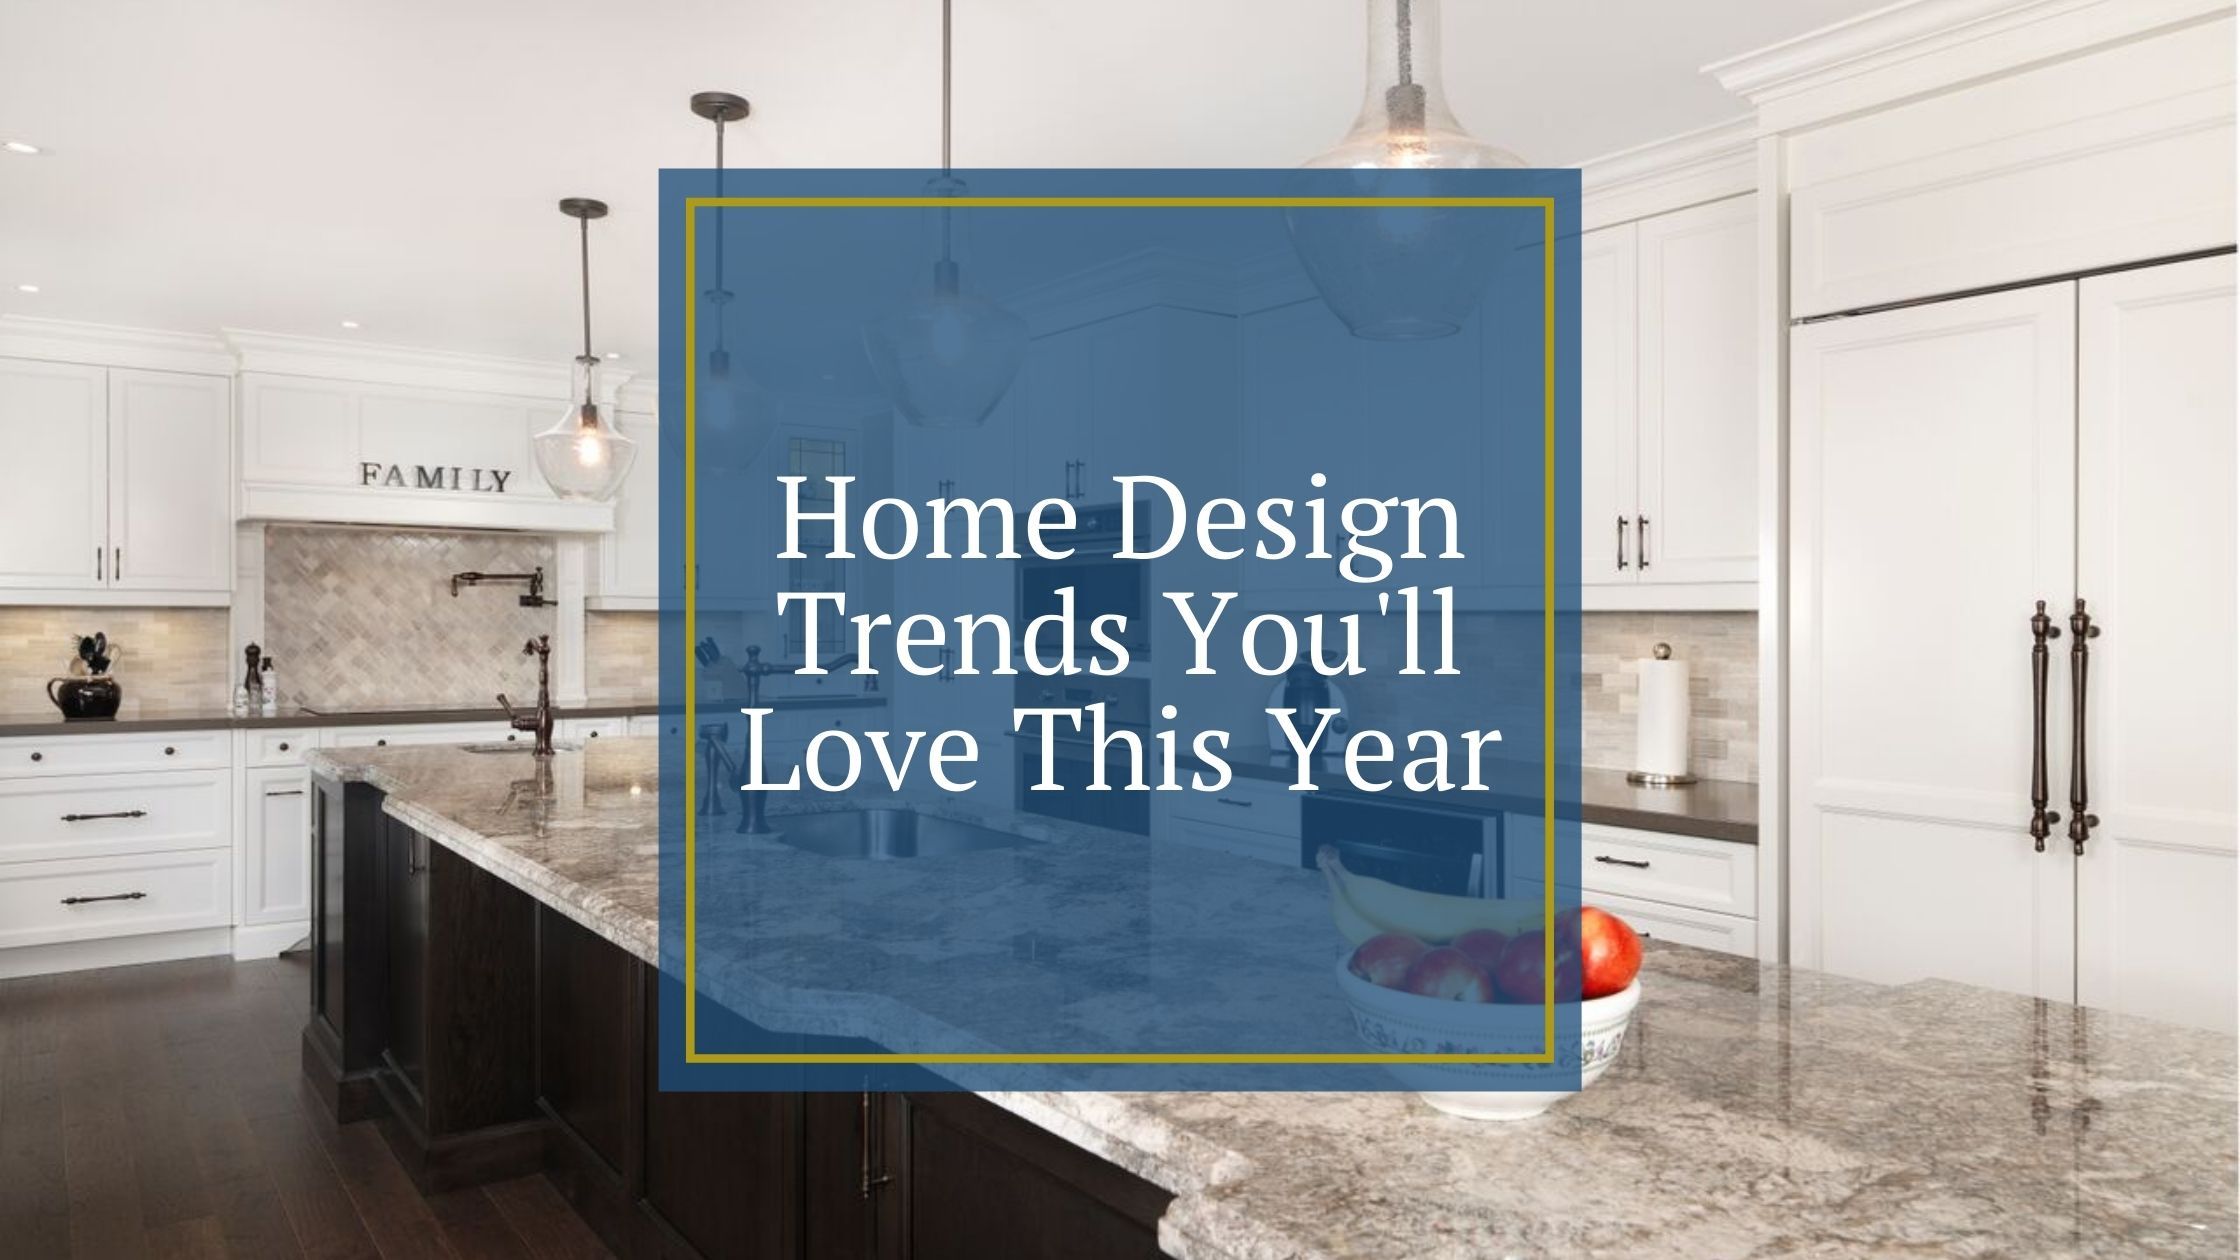 Home Design Trends You'll Love This Year